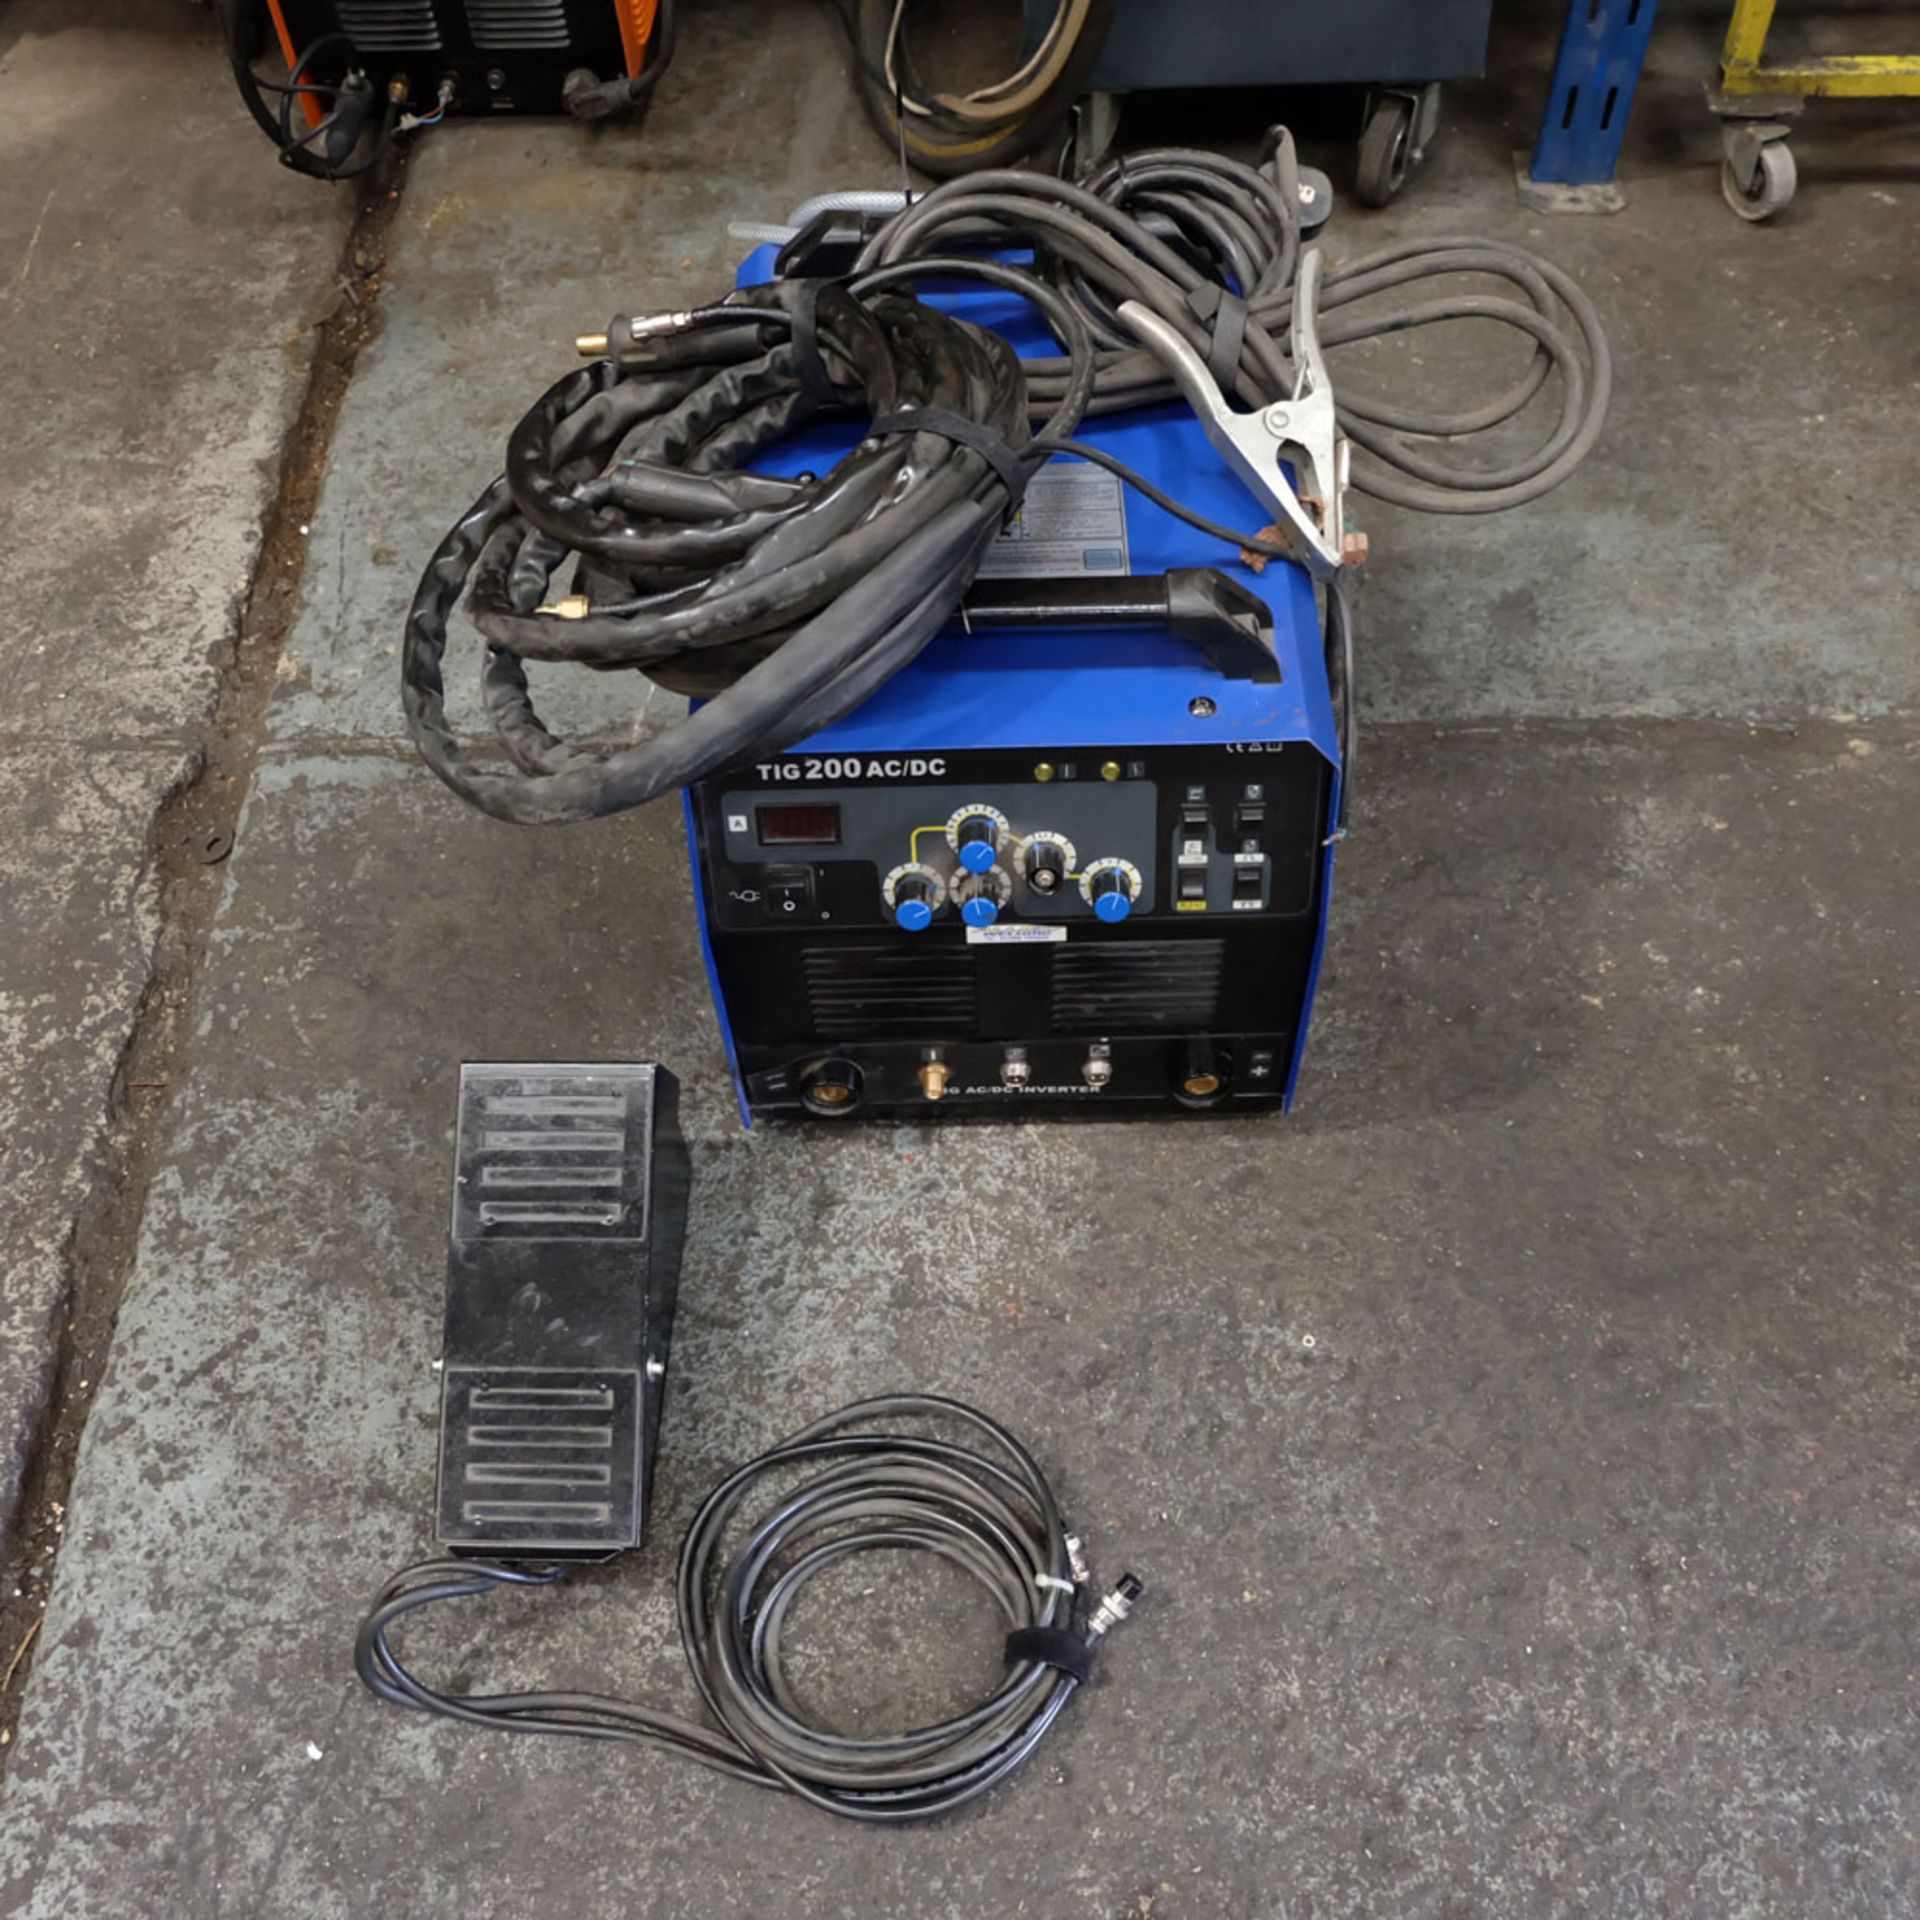 Tig 200 AC/DC Tig Welding Unit. Max 200 AMP. With Tig Torch & Foot Control. Single Phase / 240 Volt.